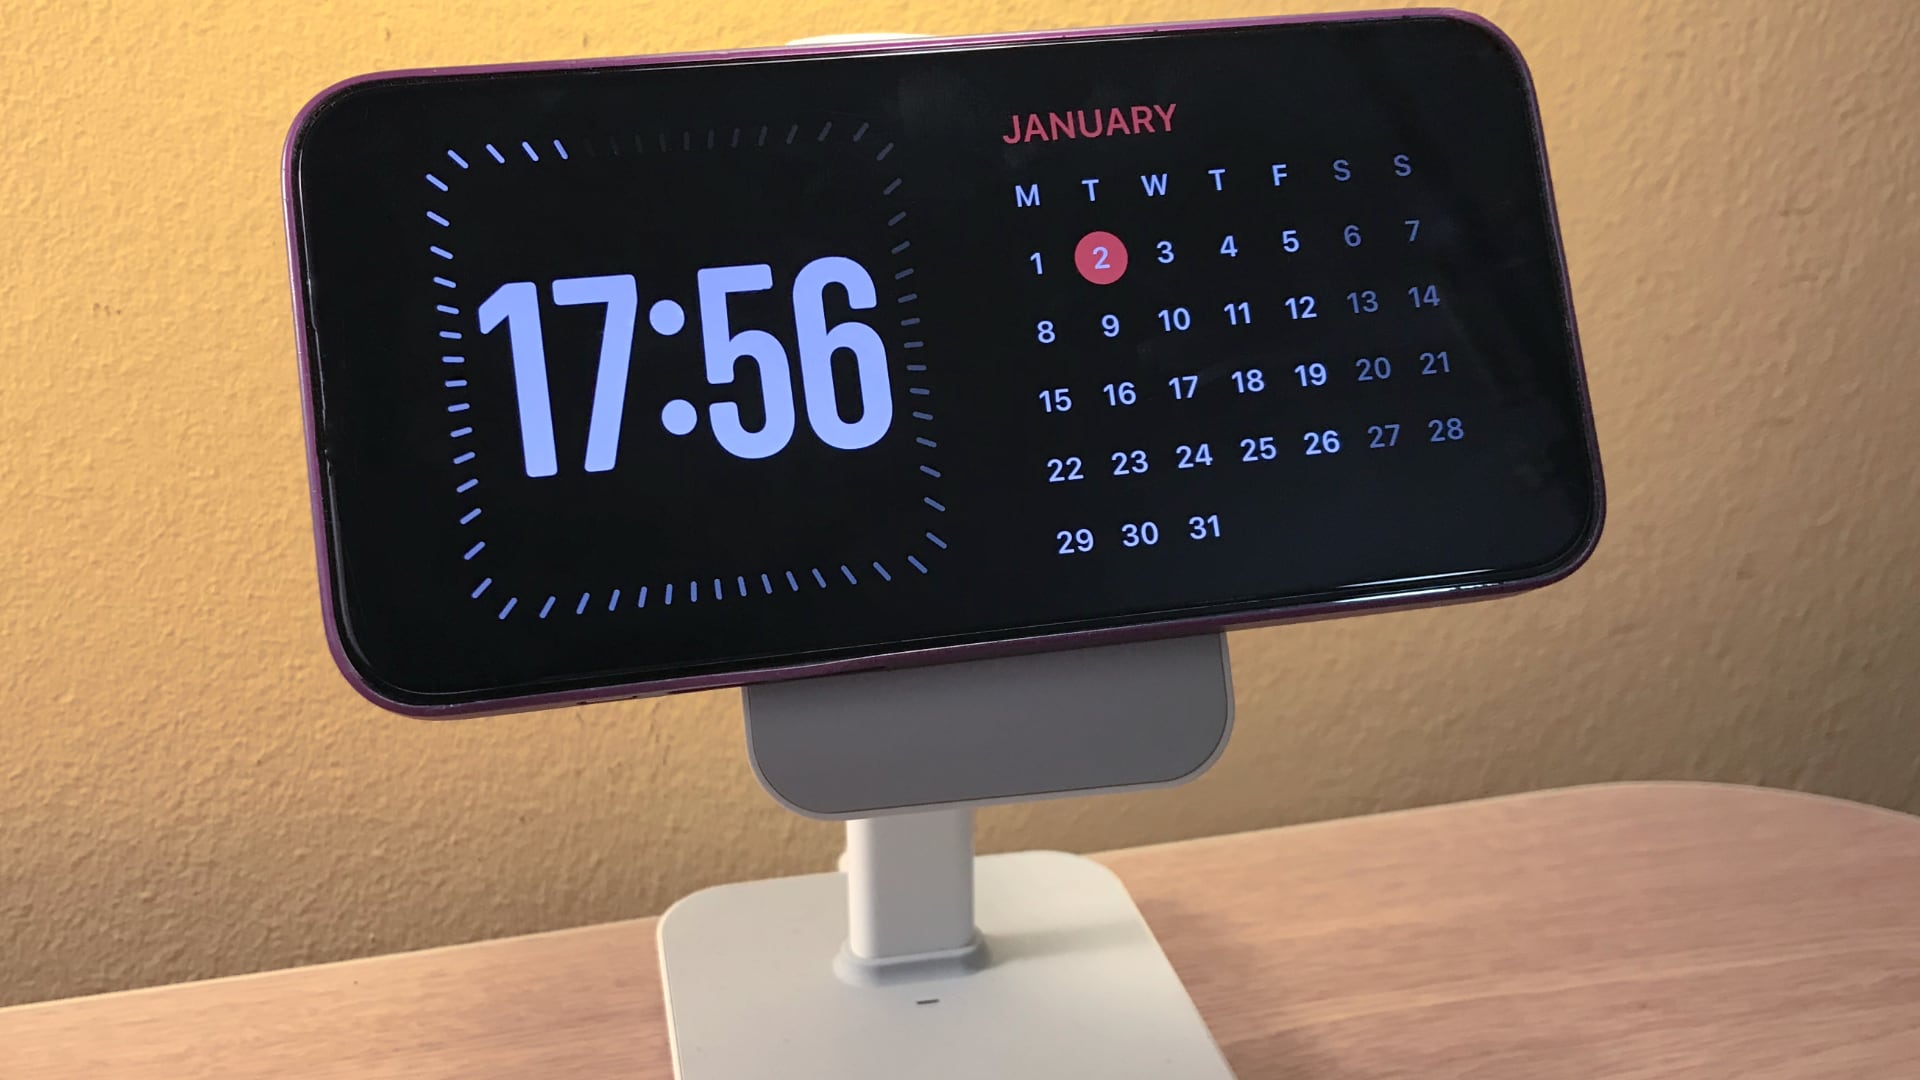 iOS 17.2 brings the new Digital Clock widget for the iPhone’s StandBy mode and Home Screen